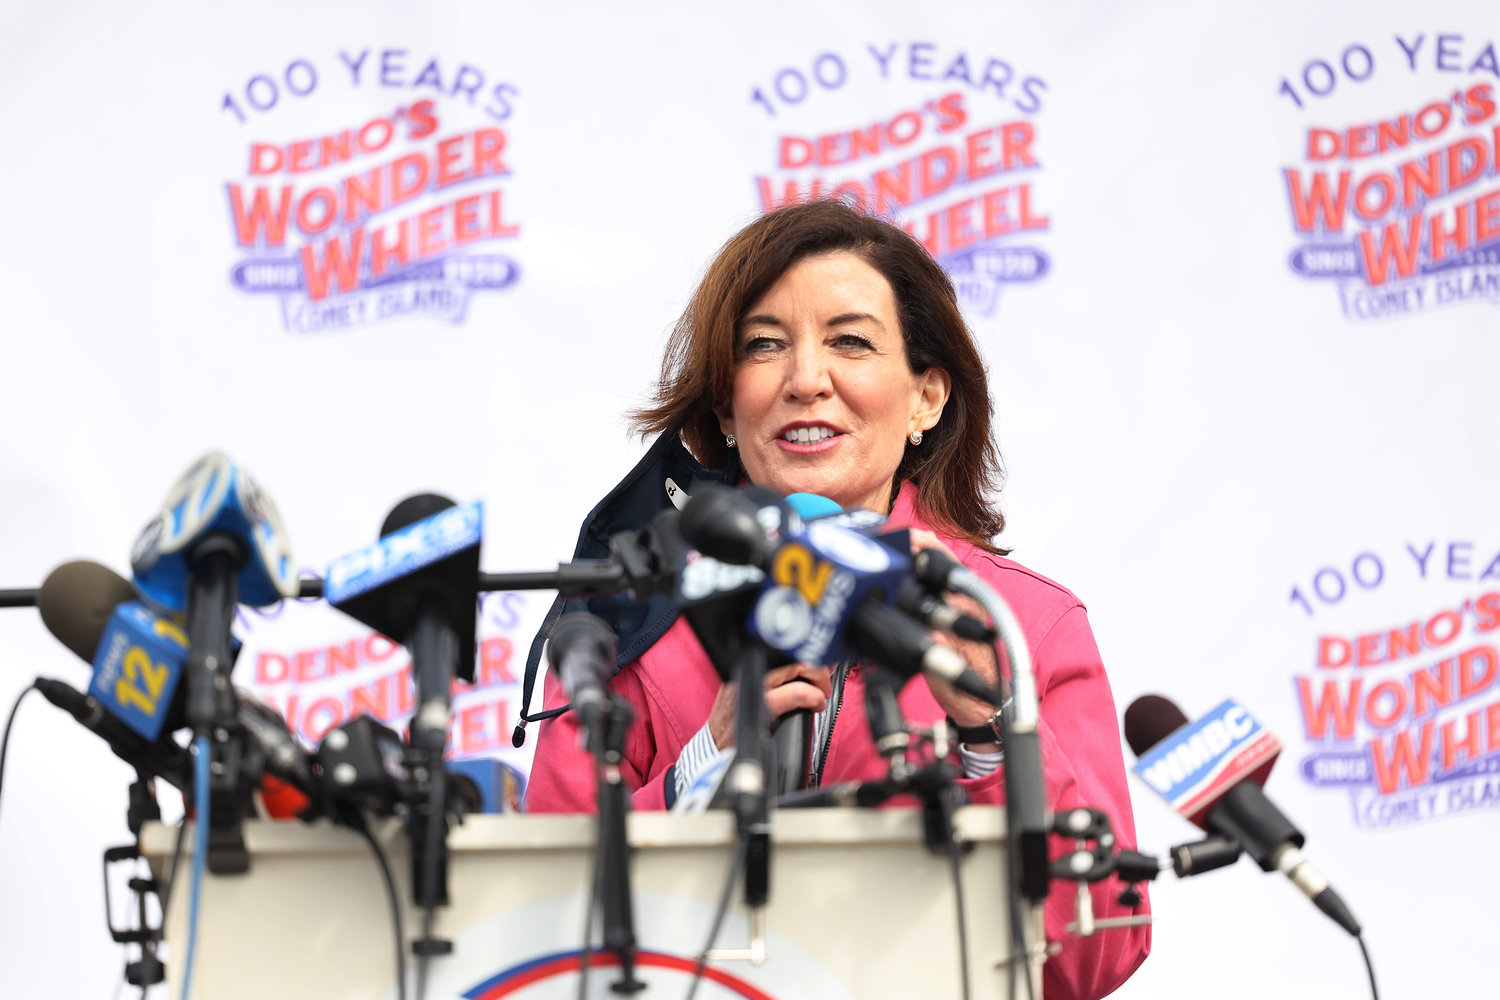 New York Lieutenant Governor Kathy Hochul speaks during a Coney Island parks reopening event in the Coney Island neighborhood of Brooklyn borough on April 9, 2021, in New York City. (Michael M. Santiago/Getty Images/TNS)